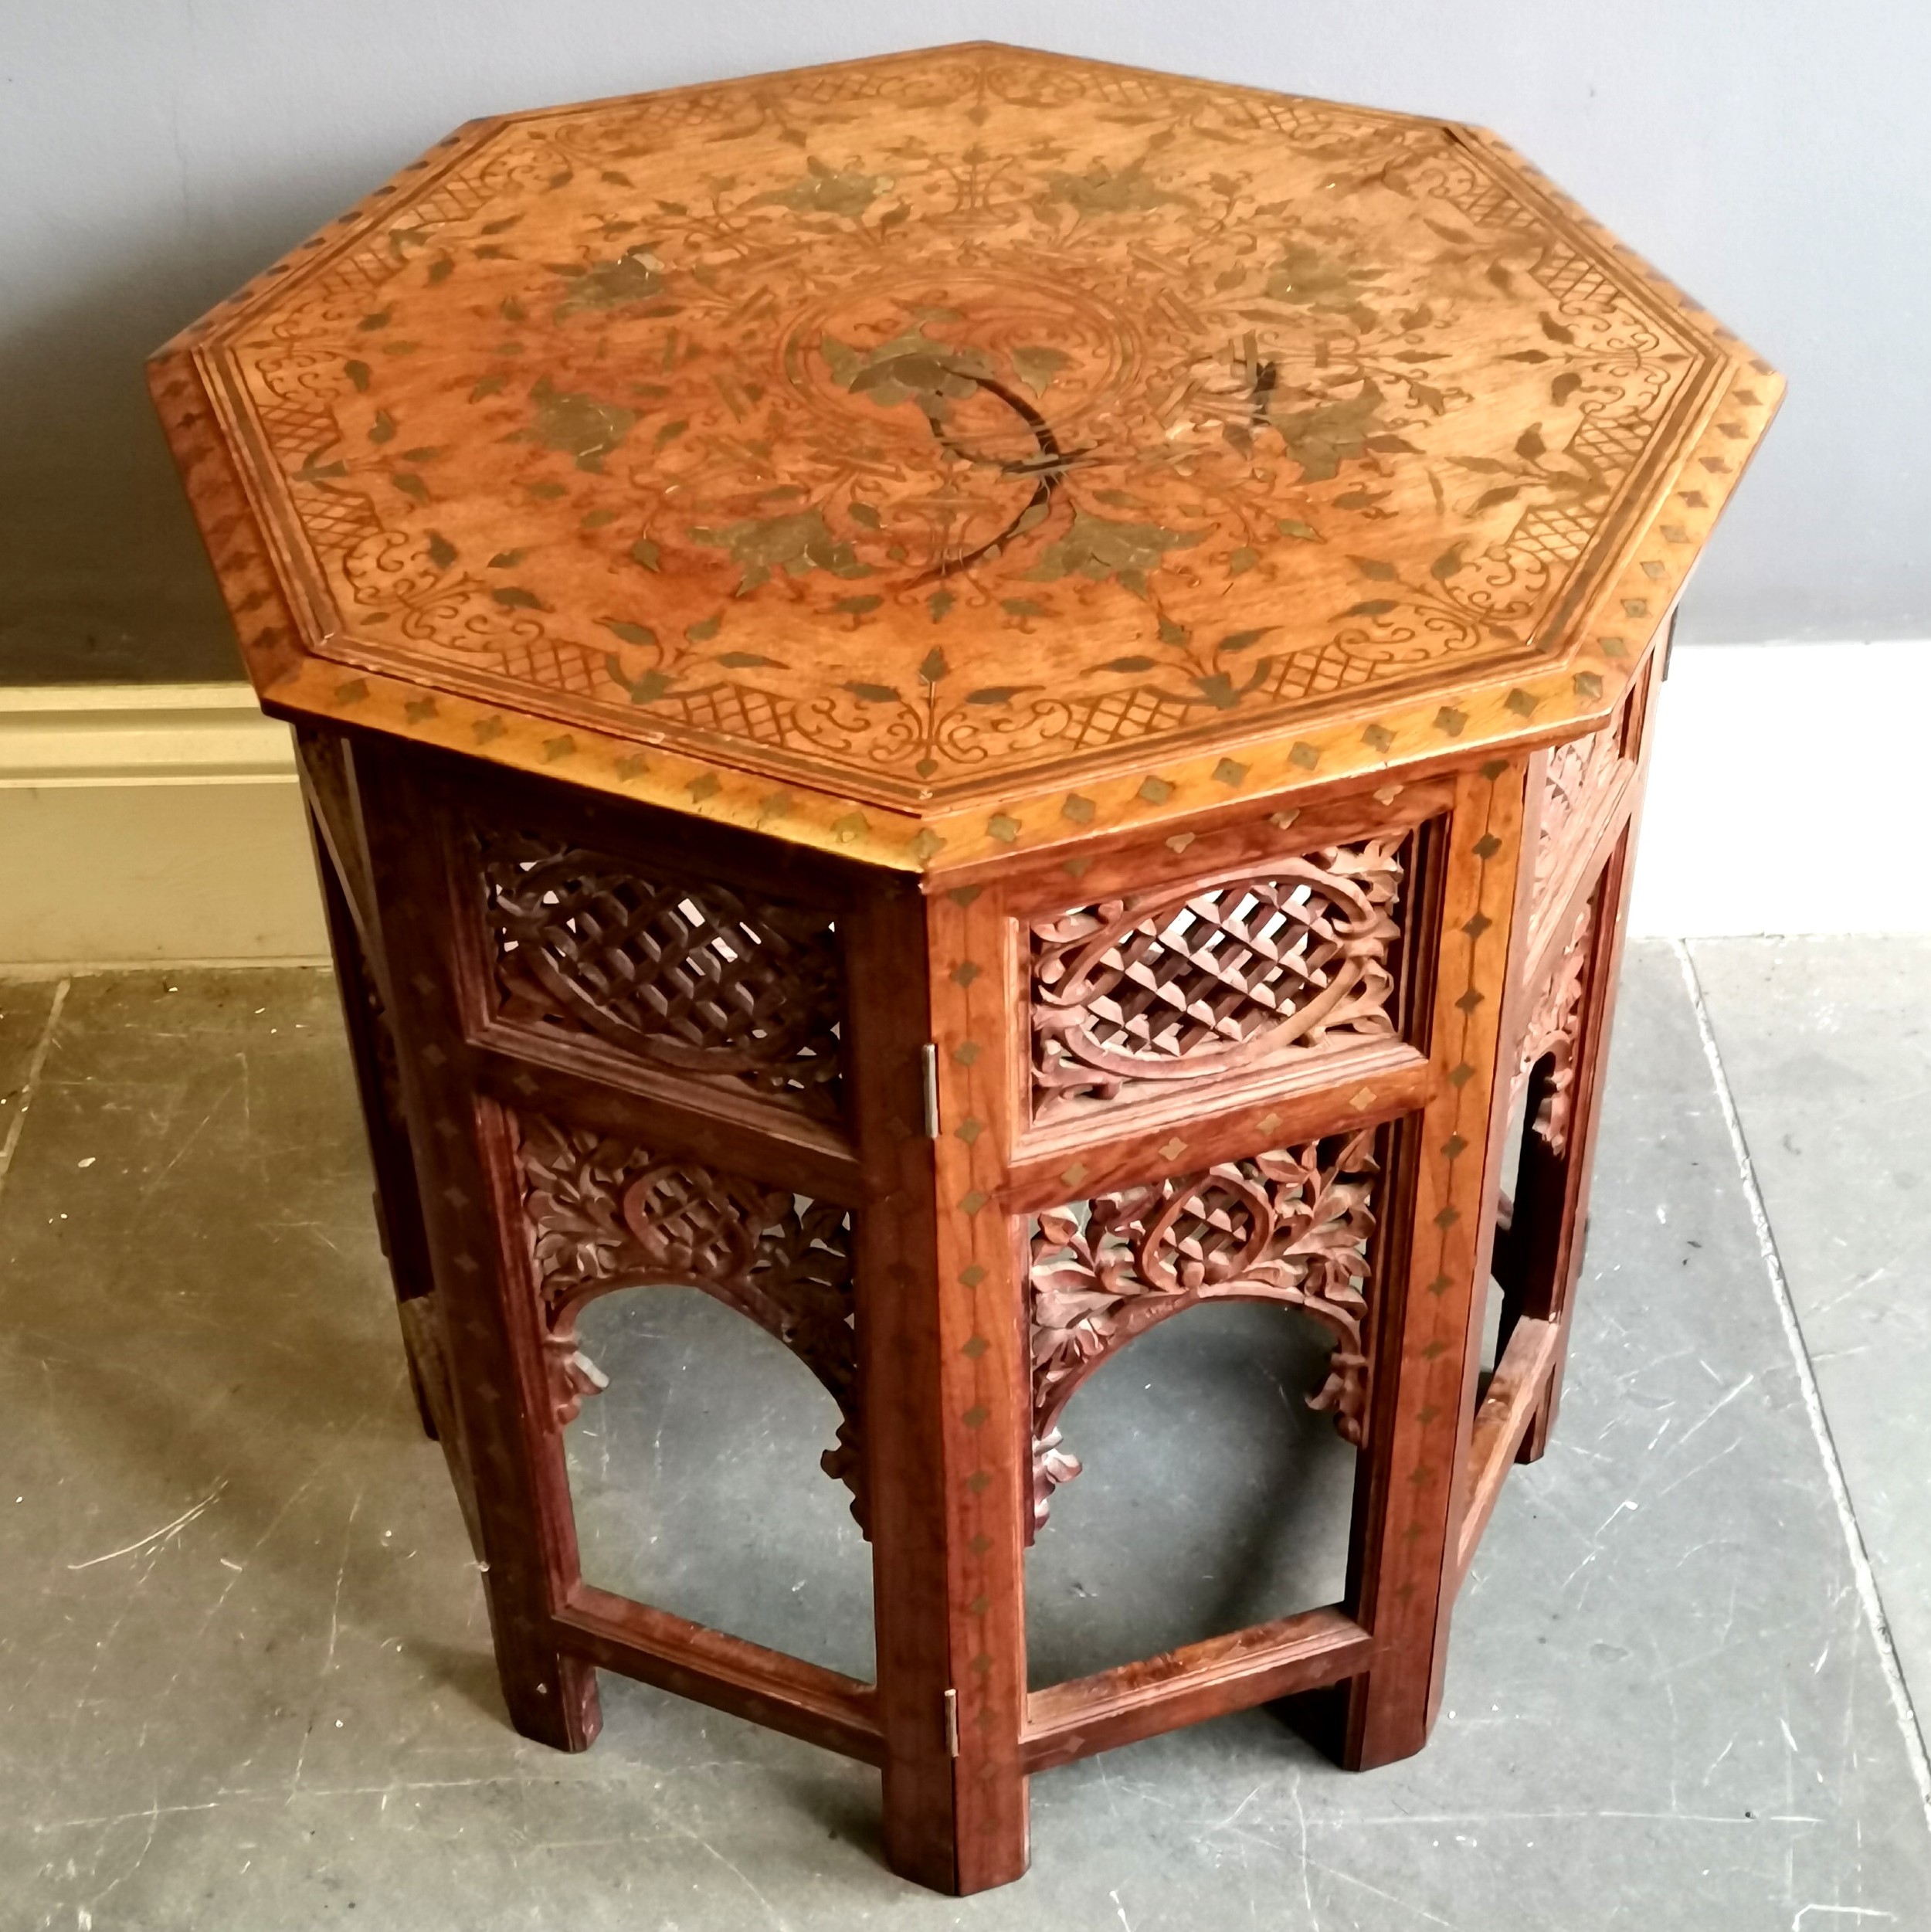 Vintage Indian teak collapsible table with brass inlay and carved fretwork decoration, 57cm diameter - Image 2 of 3